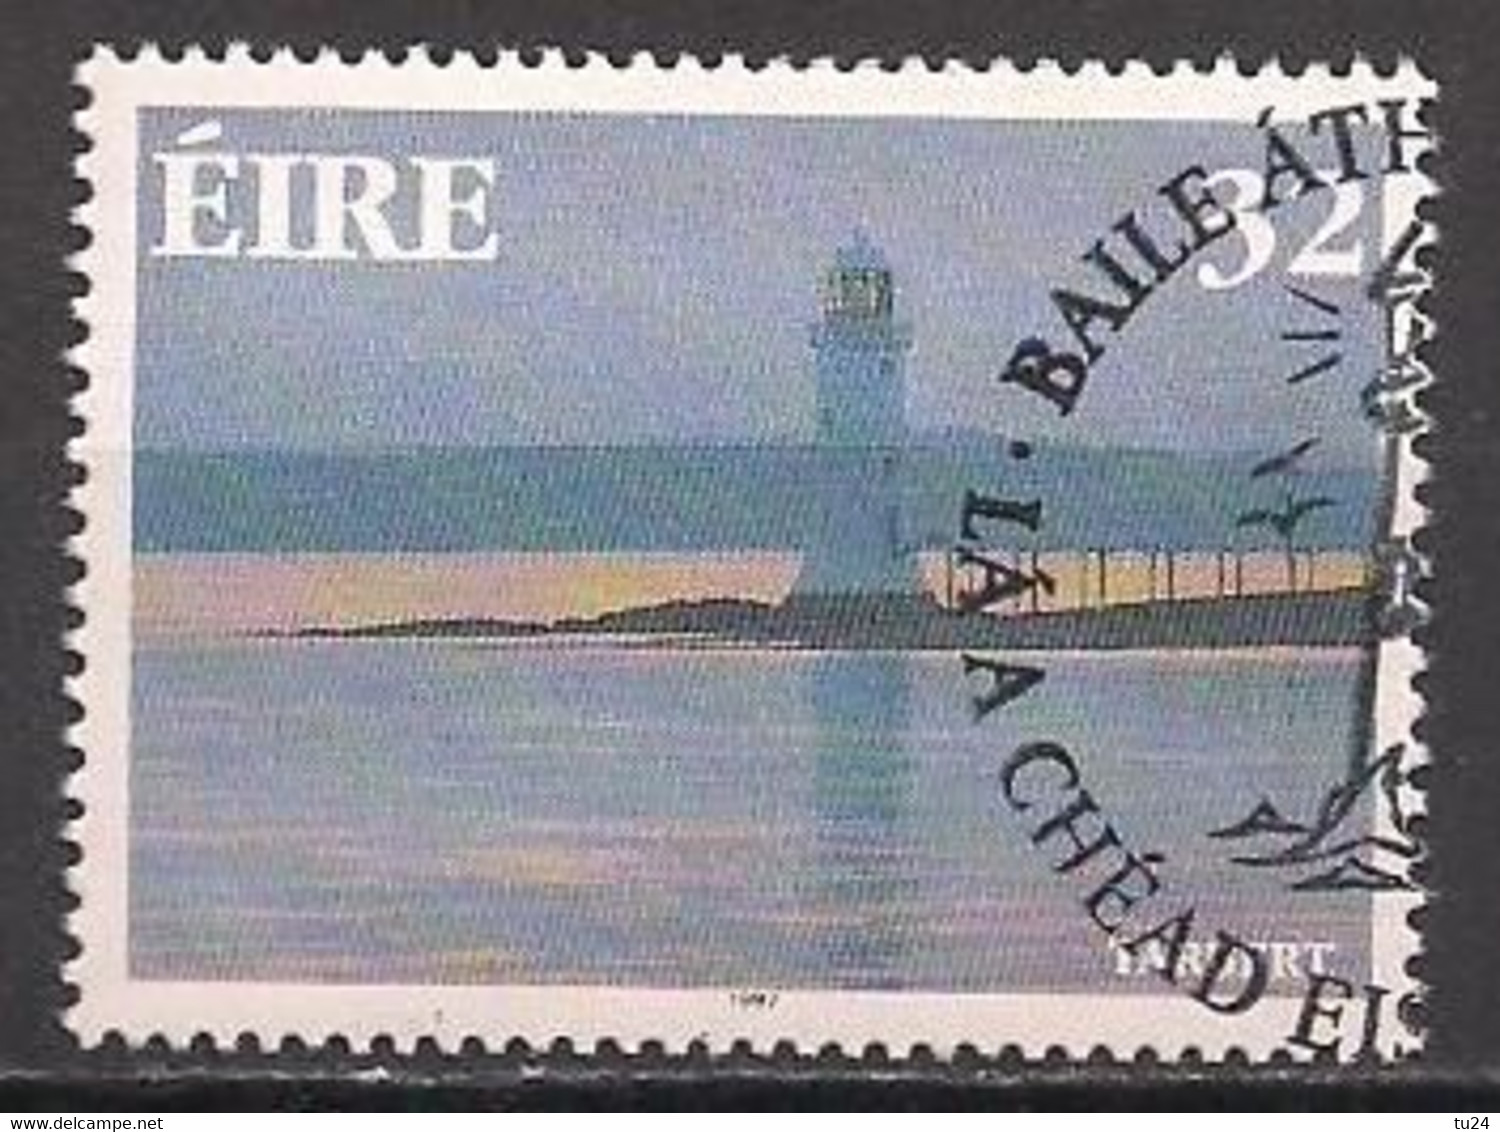 Irland  (1997)  Mi.Nr.  1009 A  Gest. / Used  (1ct26) Gez. 14 3/4 : 14 - Used Stamps